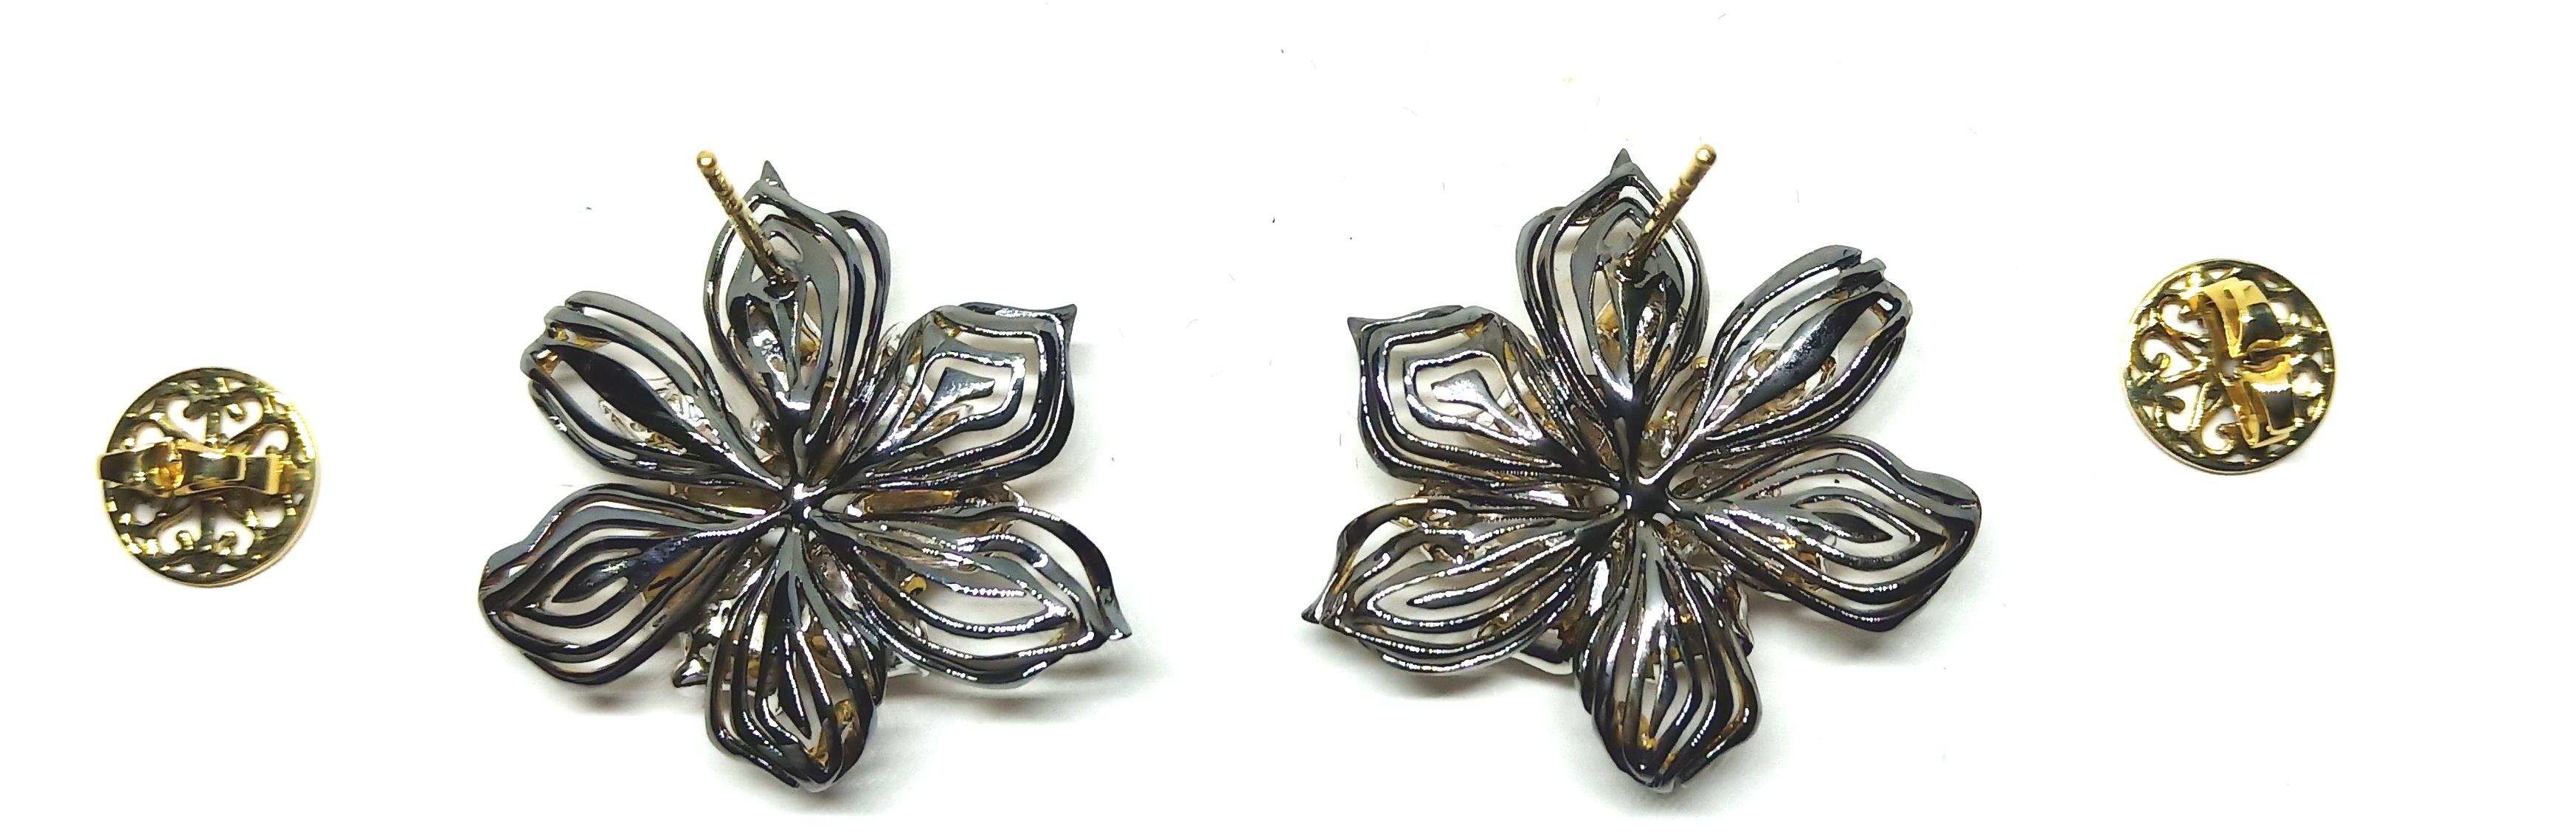 Contemporary Art One of a Kind Diamond Yellow and White Gold Clip-On Earrings For Sale 3